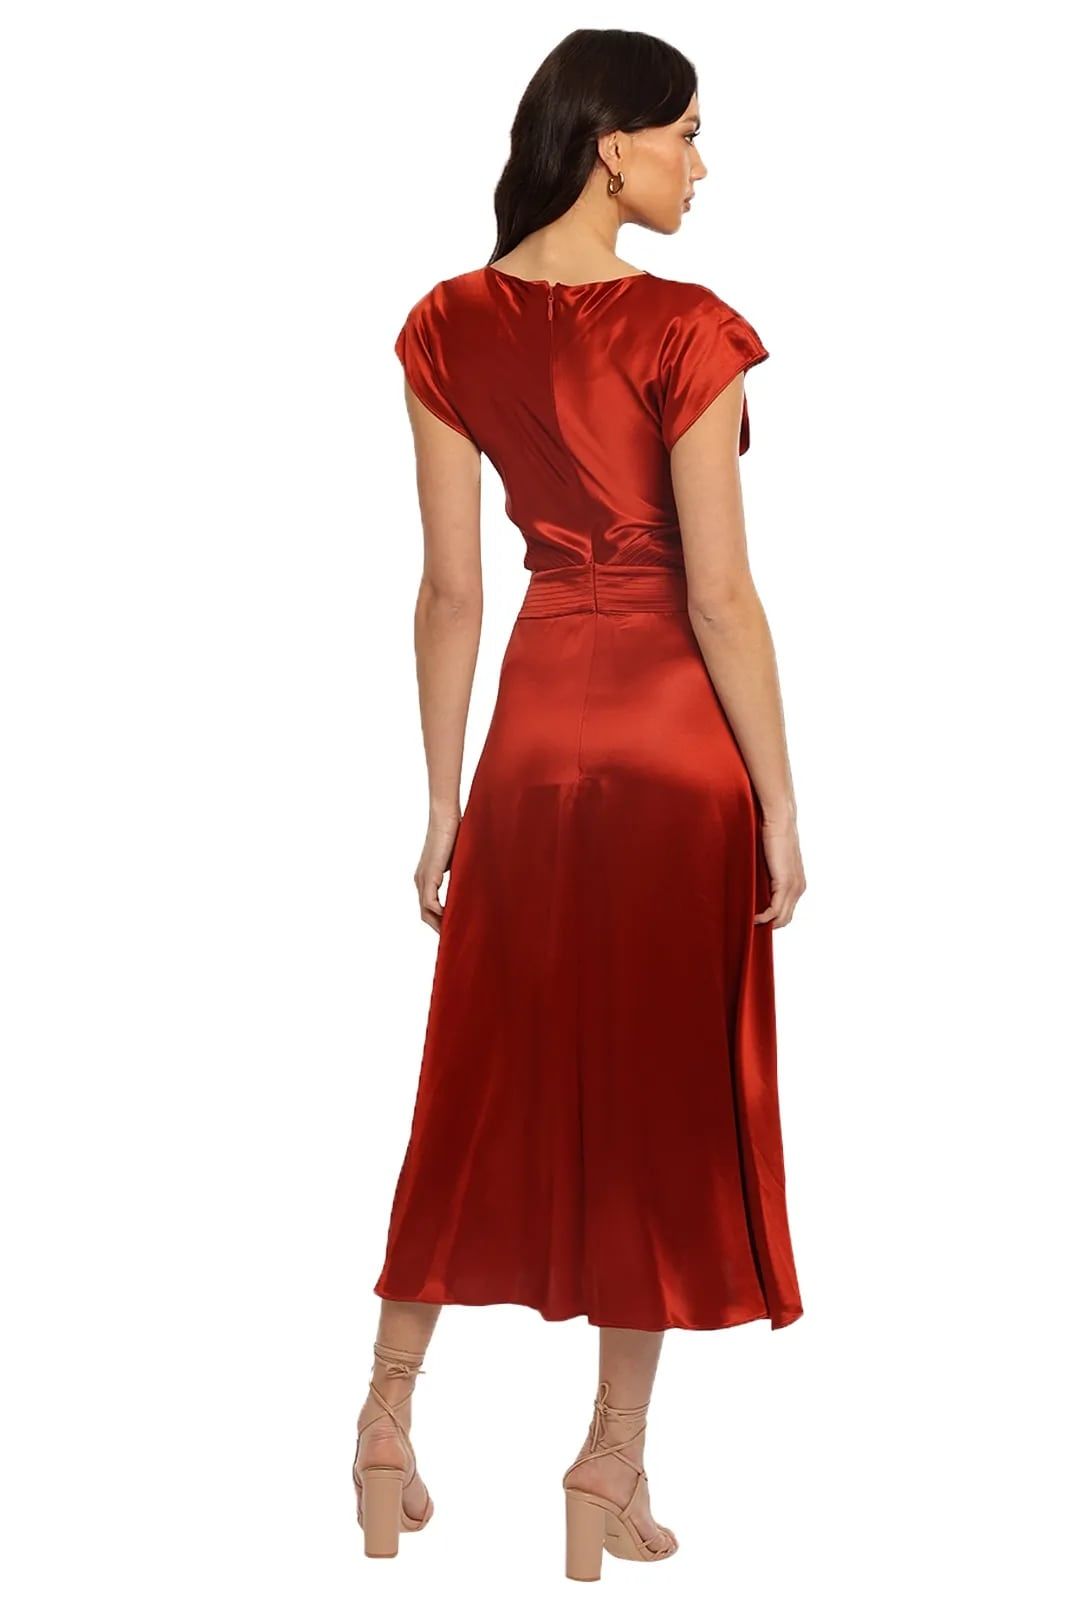 Plympton dress in red for formal events.